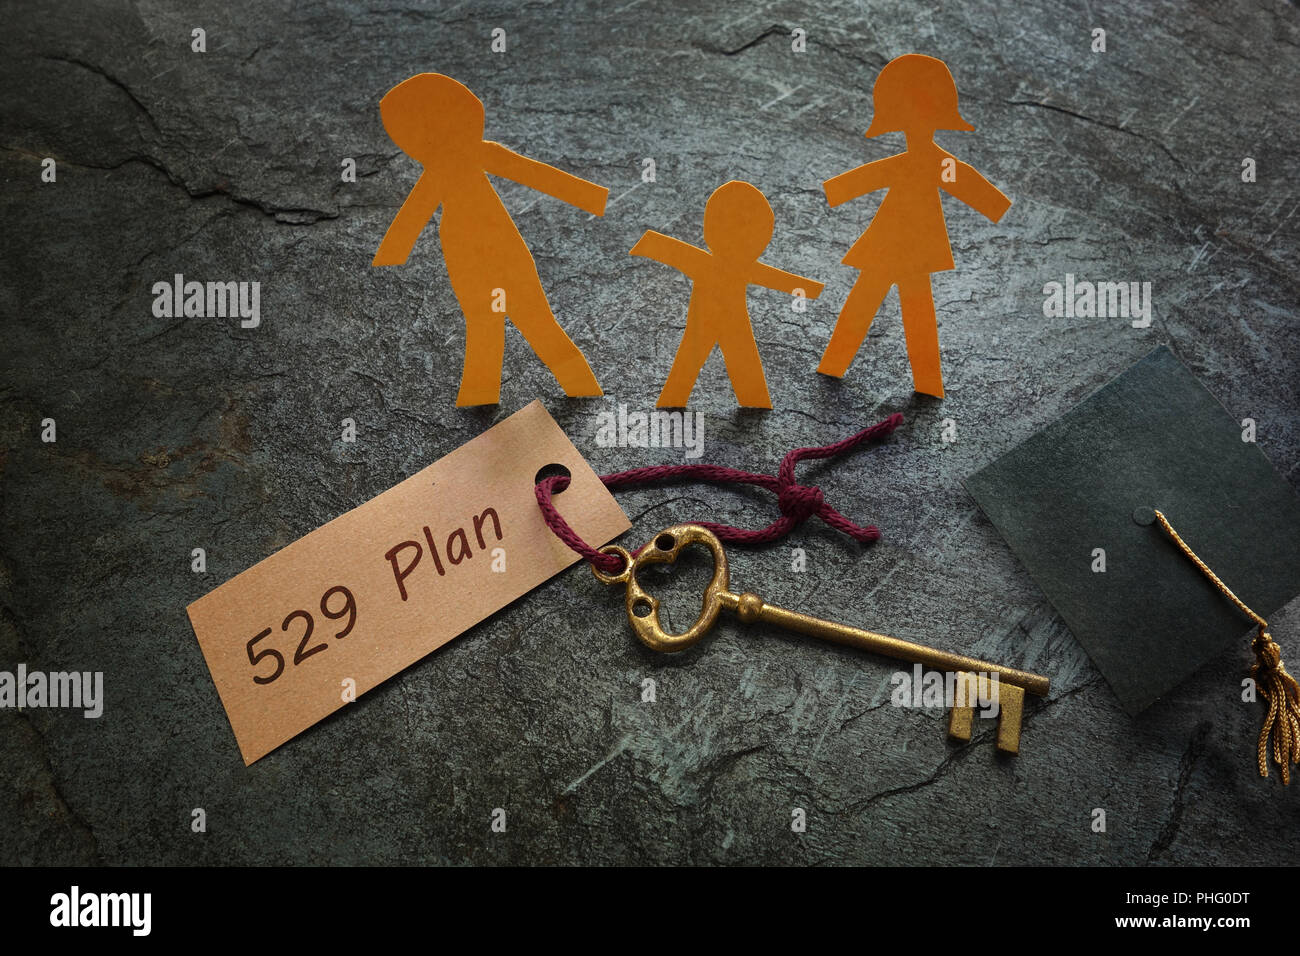 Paper family with 529 Plan gold key Stock Photo